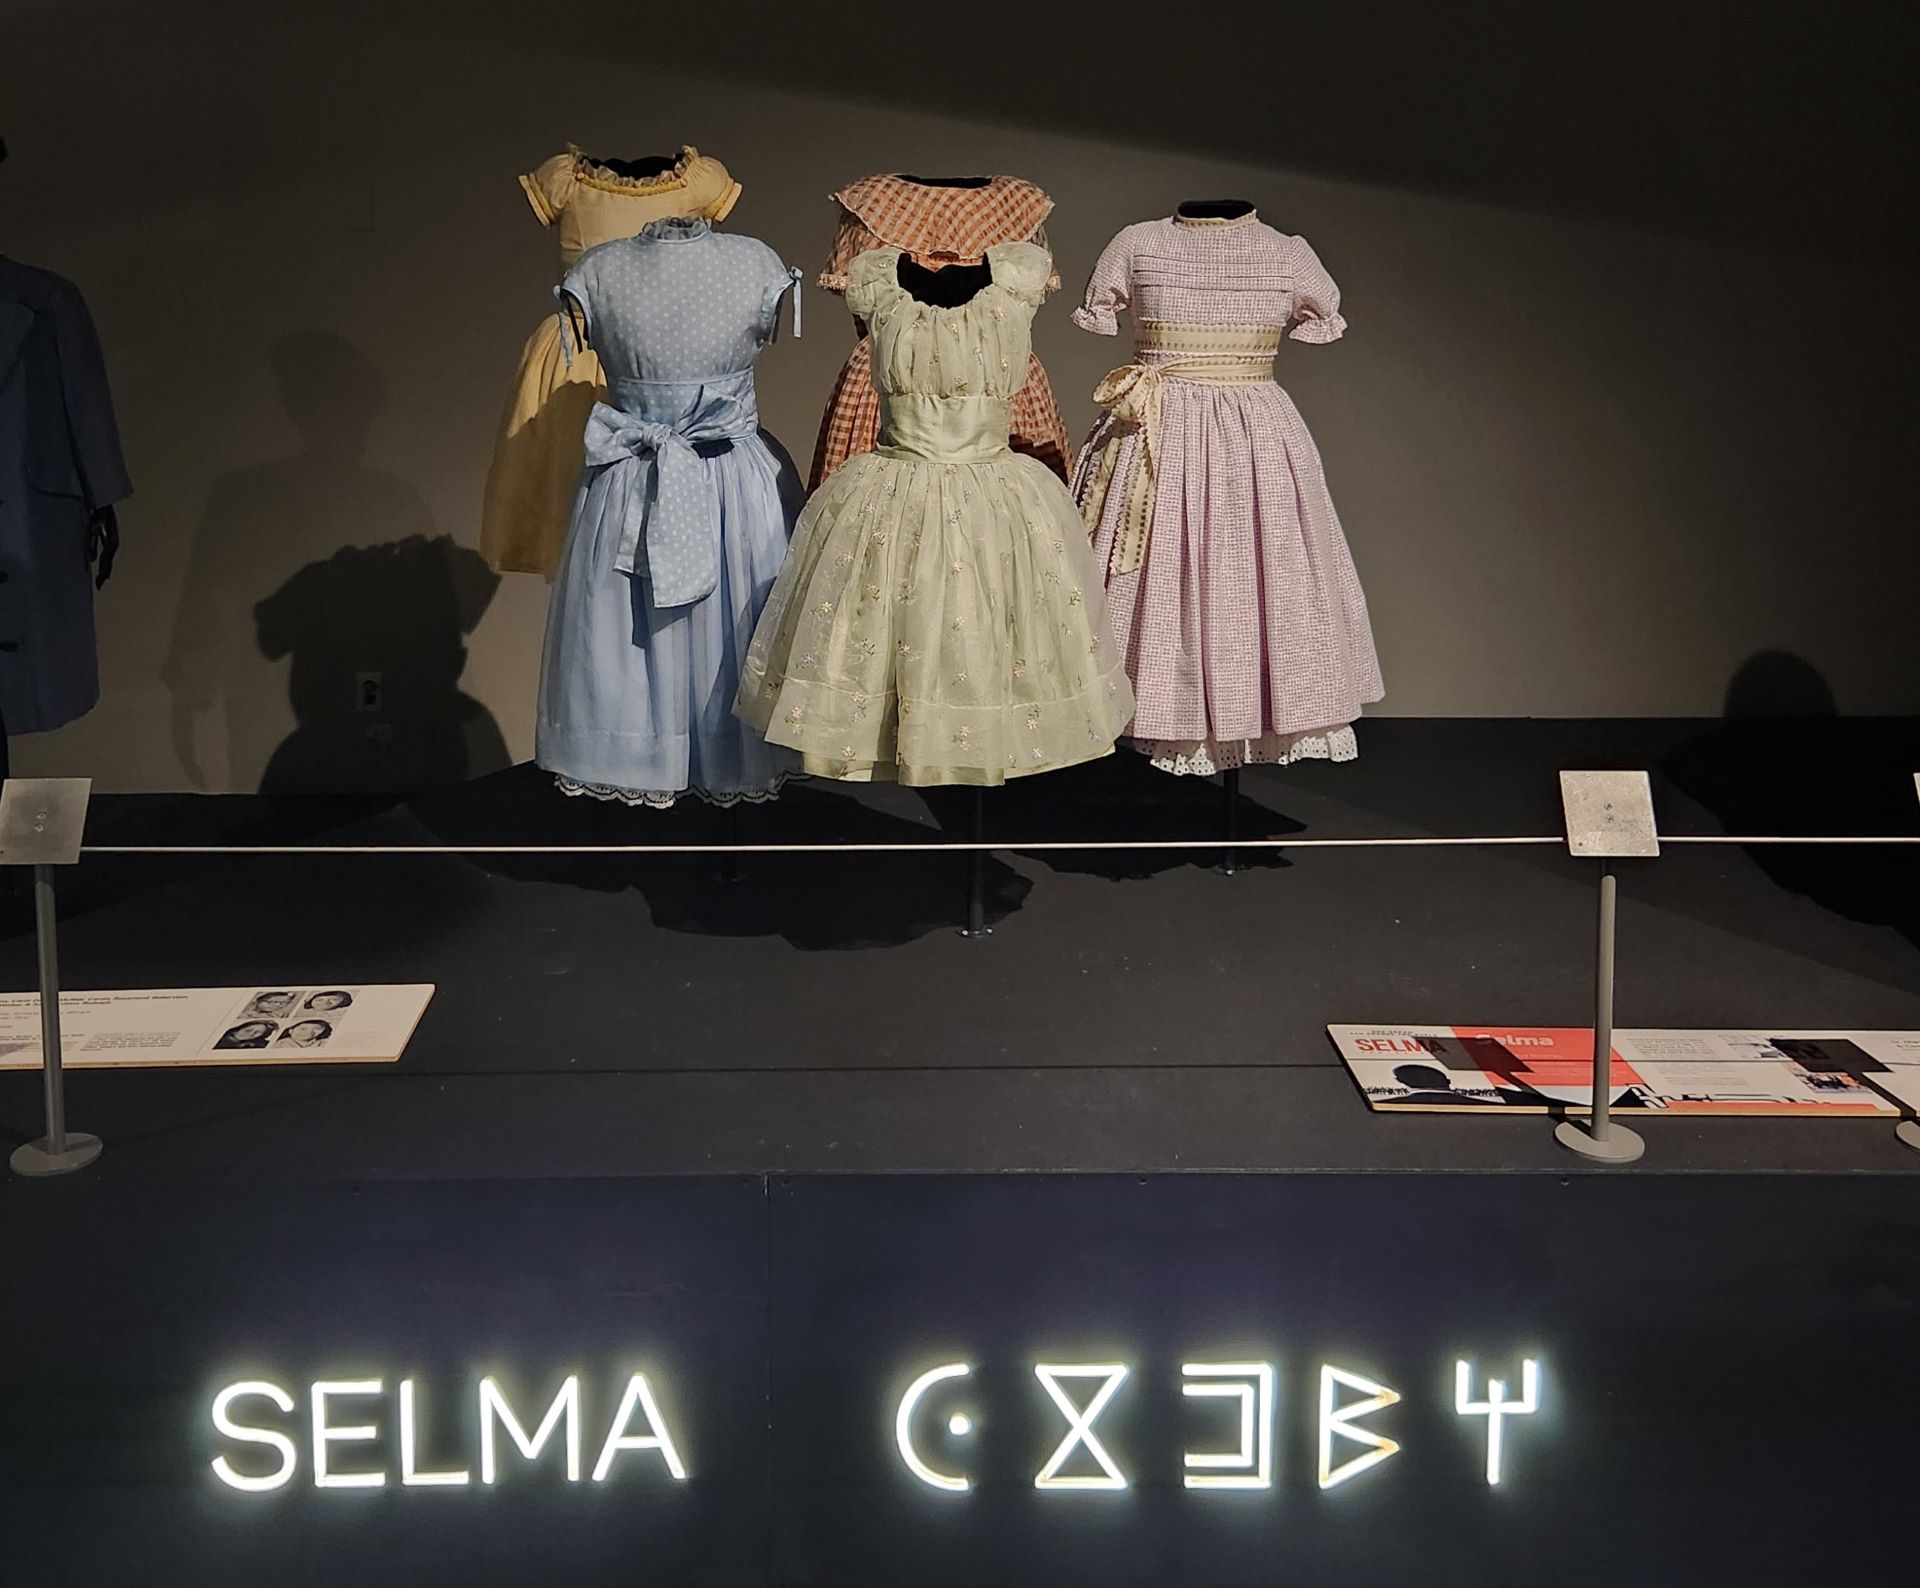 Four costumes from the film Selma